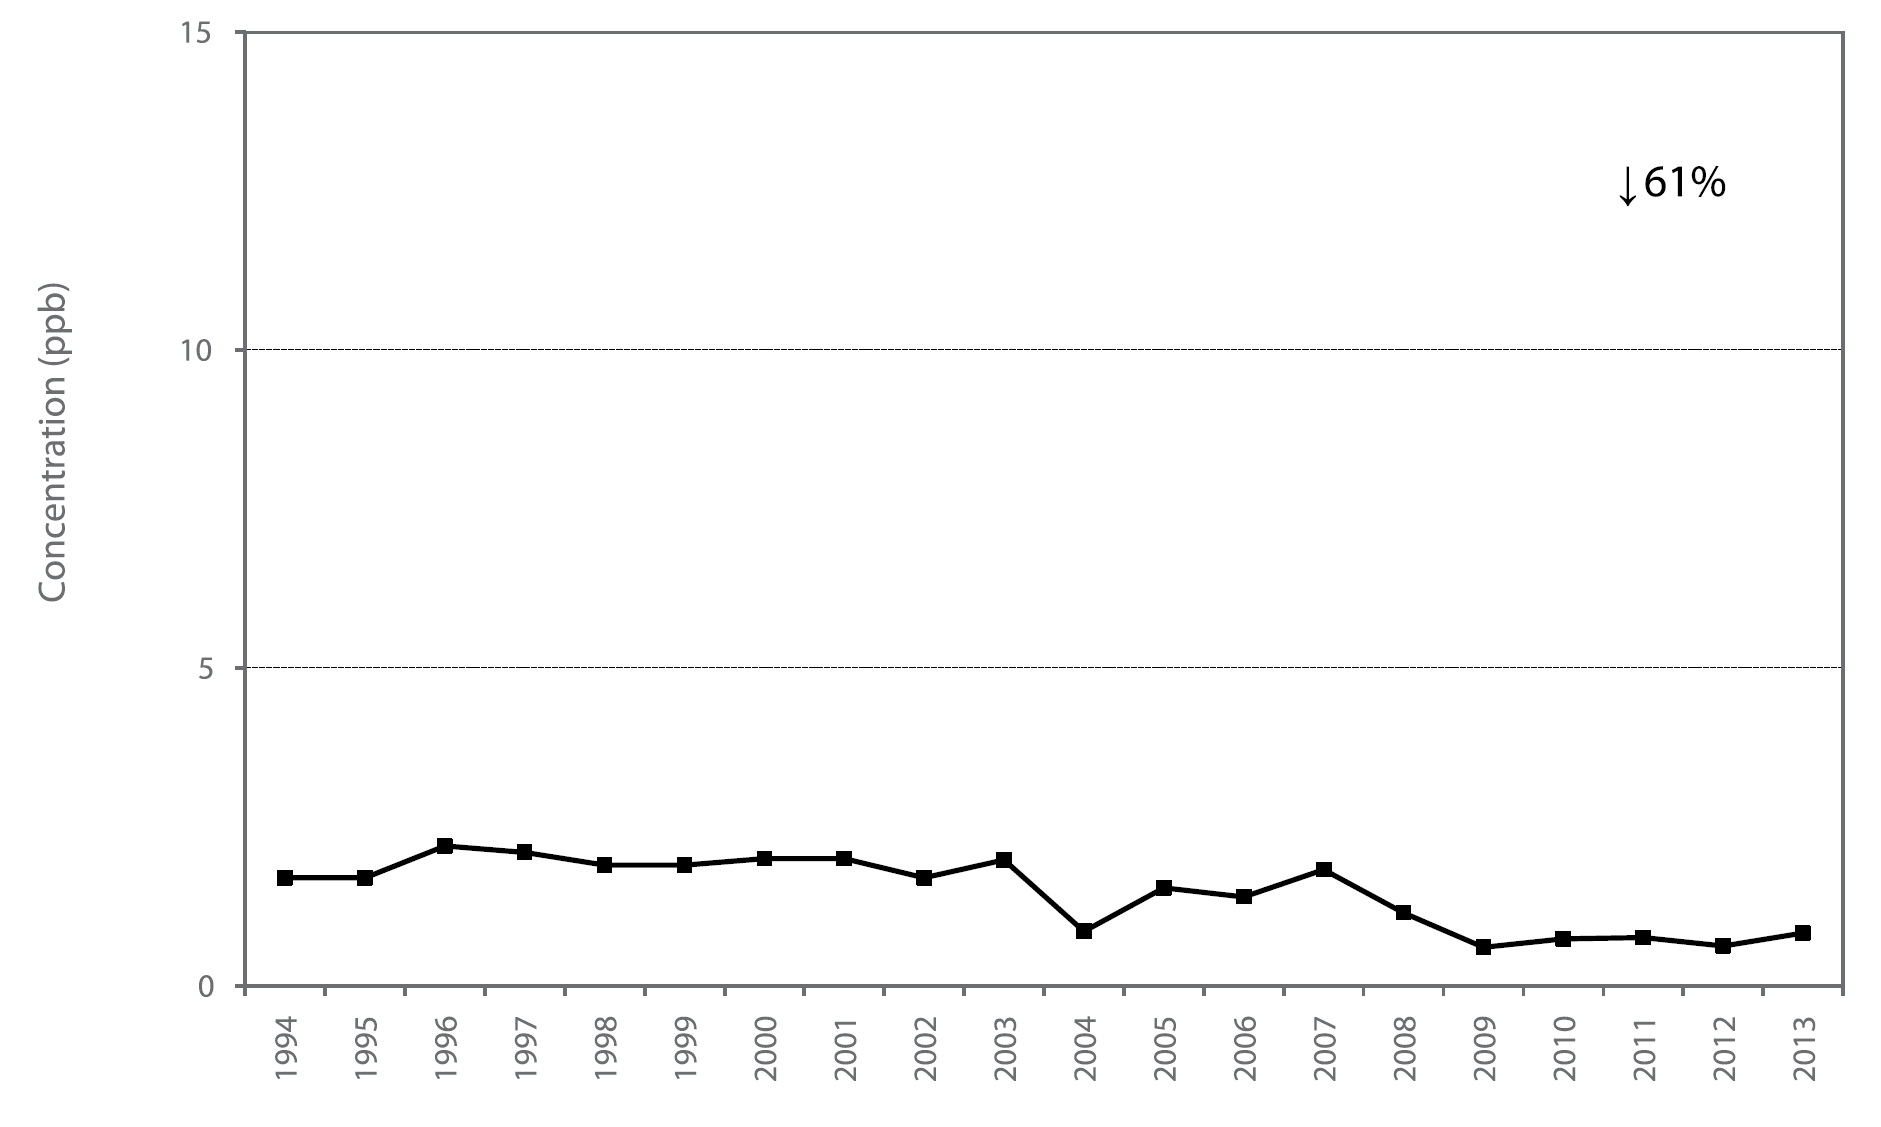 Figure A47 is a line chart displaying the sulphur dioxide annual mean at Sault Ste. Marie from 1994 to 2013. Over this 20-year period, sulphur dioxide decreased 61%.